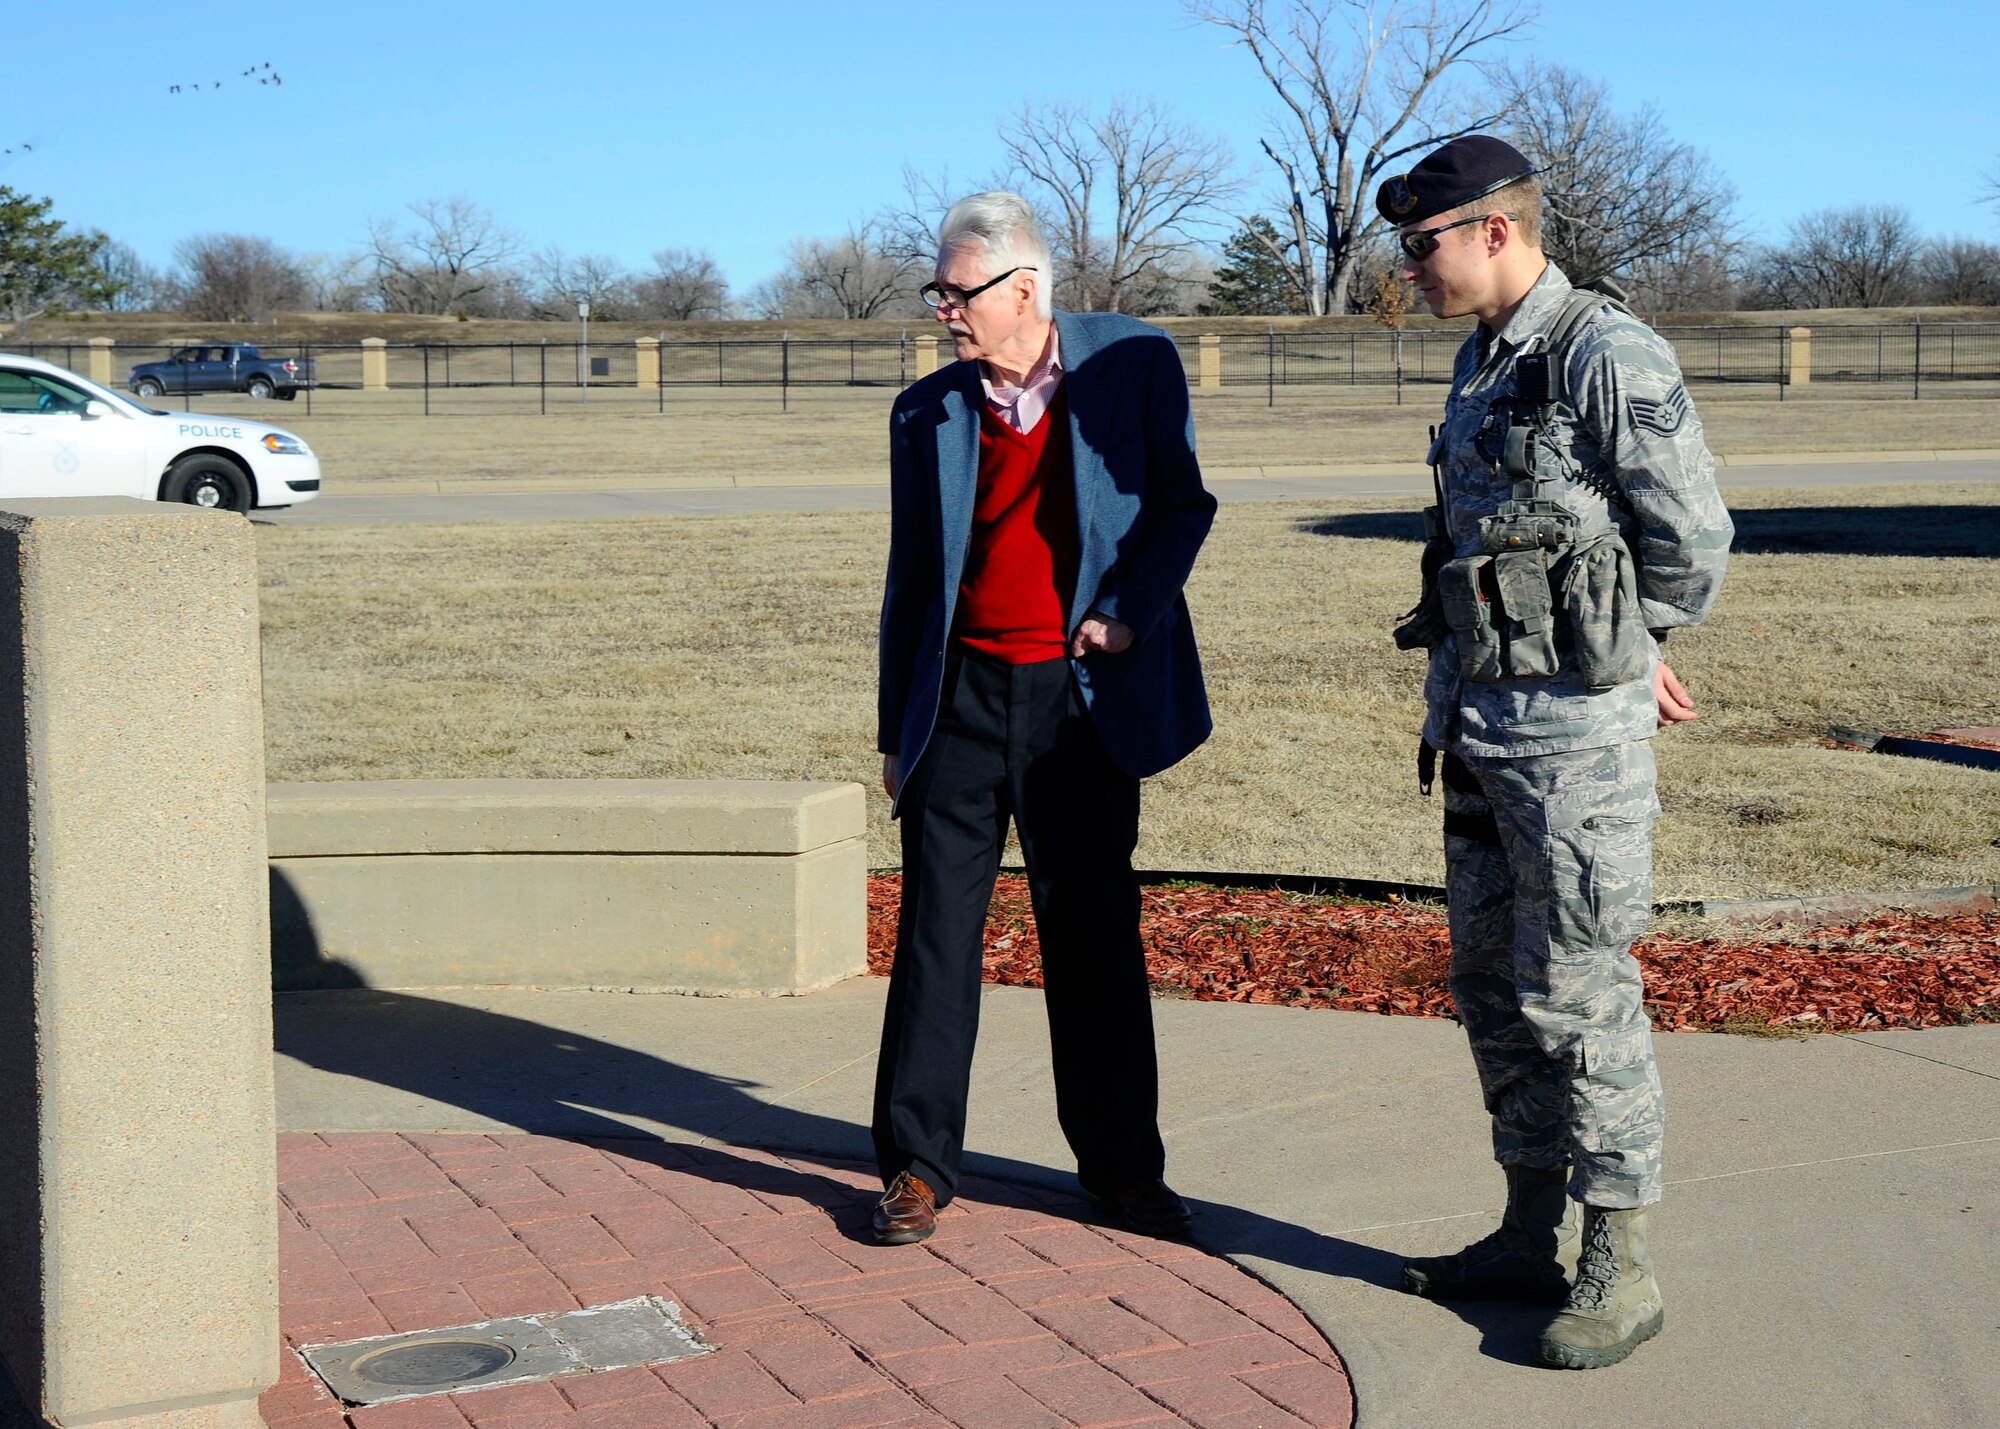 Stephen Carlton and Staff Sgt. Sean Rousseau, 22nd Security Forces Squadron patrolman, visit a memorial, Jan. 17, 2014, at McConnell Air Force Base, Kan. Carlton was stationed at McConnell in the 1960s and was able to tour the base and meet with current security forces Airmen to see how the Air Force has changed in the last 50 years. (U.S. Air Force photo/Senior Airman Victor J. Caputo)